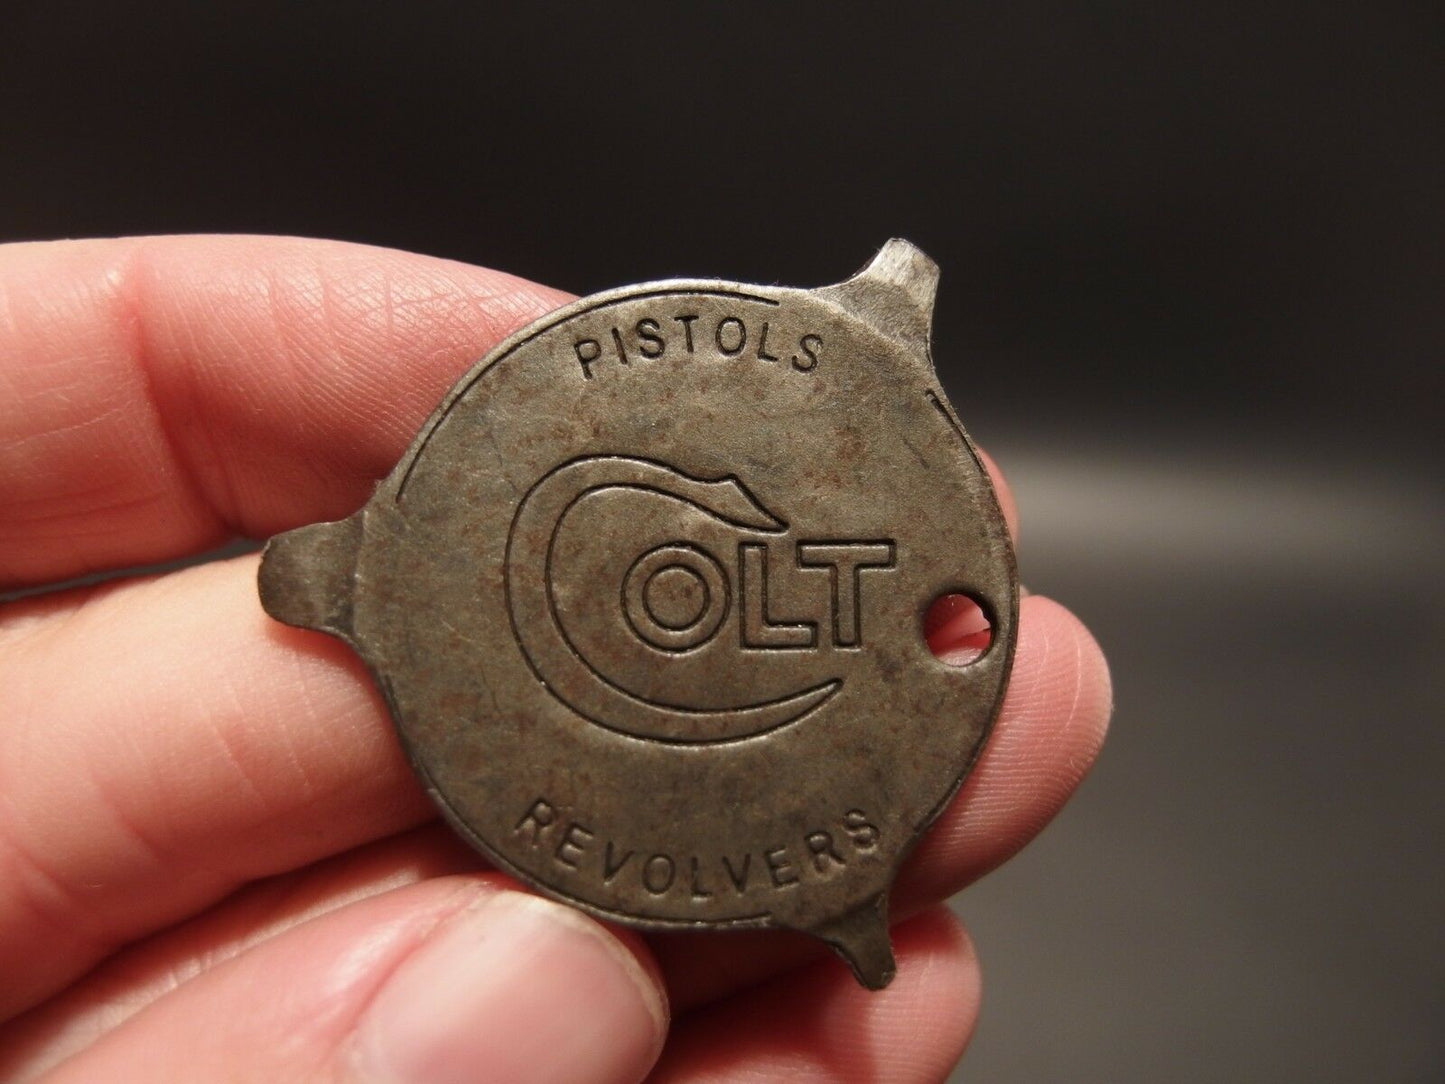 Antique Vintage Style Colt Firearms Screw Driver Key chain - Early Home Decor